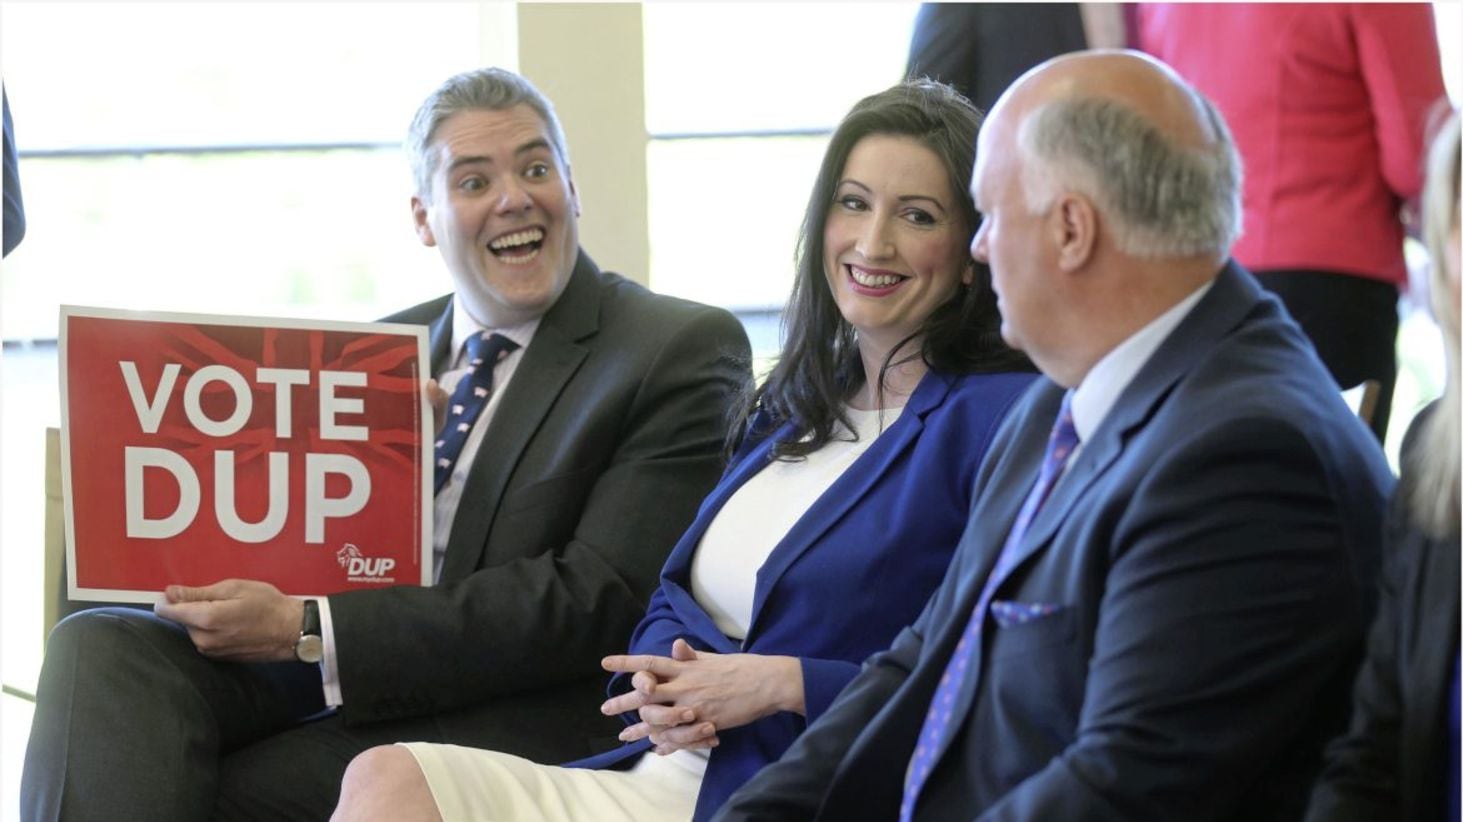 DUP's Gavin Robinson and Emma Little Pengelly during the Launch of the DUP's General election campaign launch at the Castlereigh Hills Golf in east Belfast ahead of the election on June 8. Picture by Hugh Russell